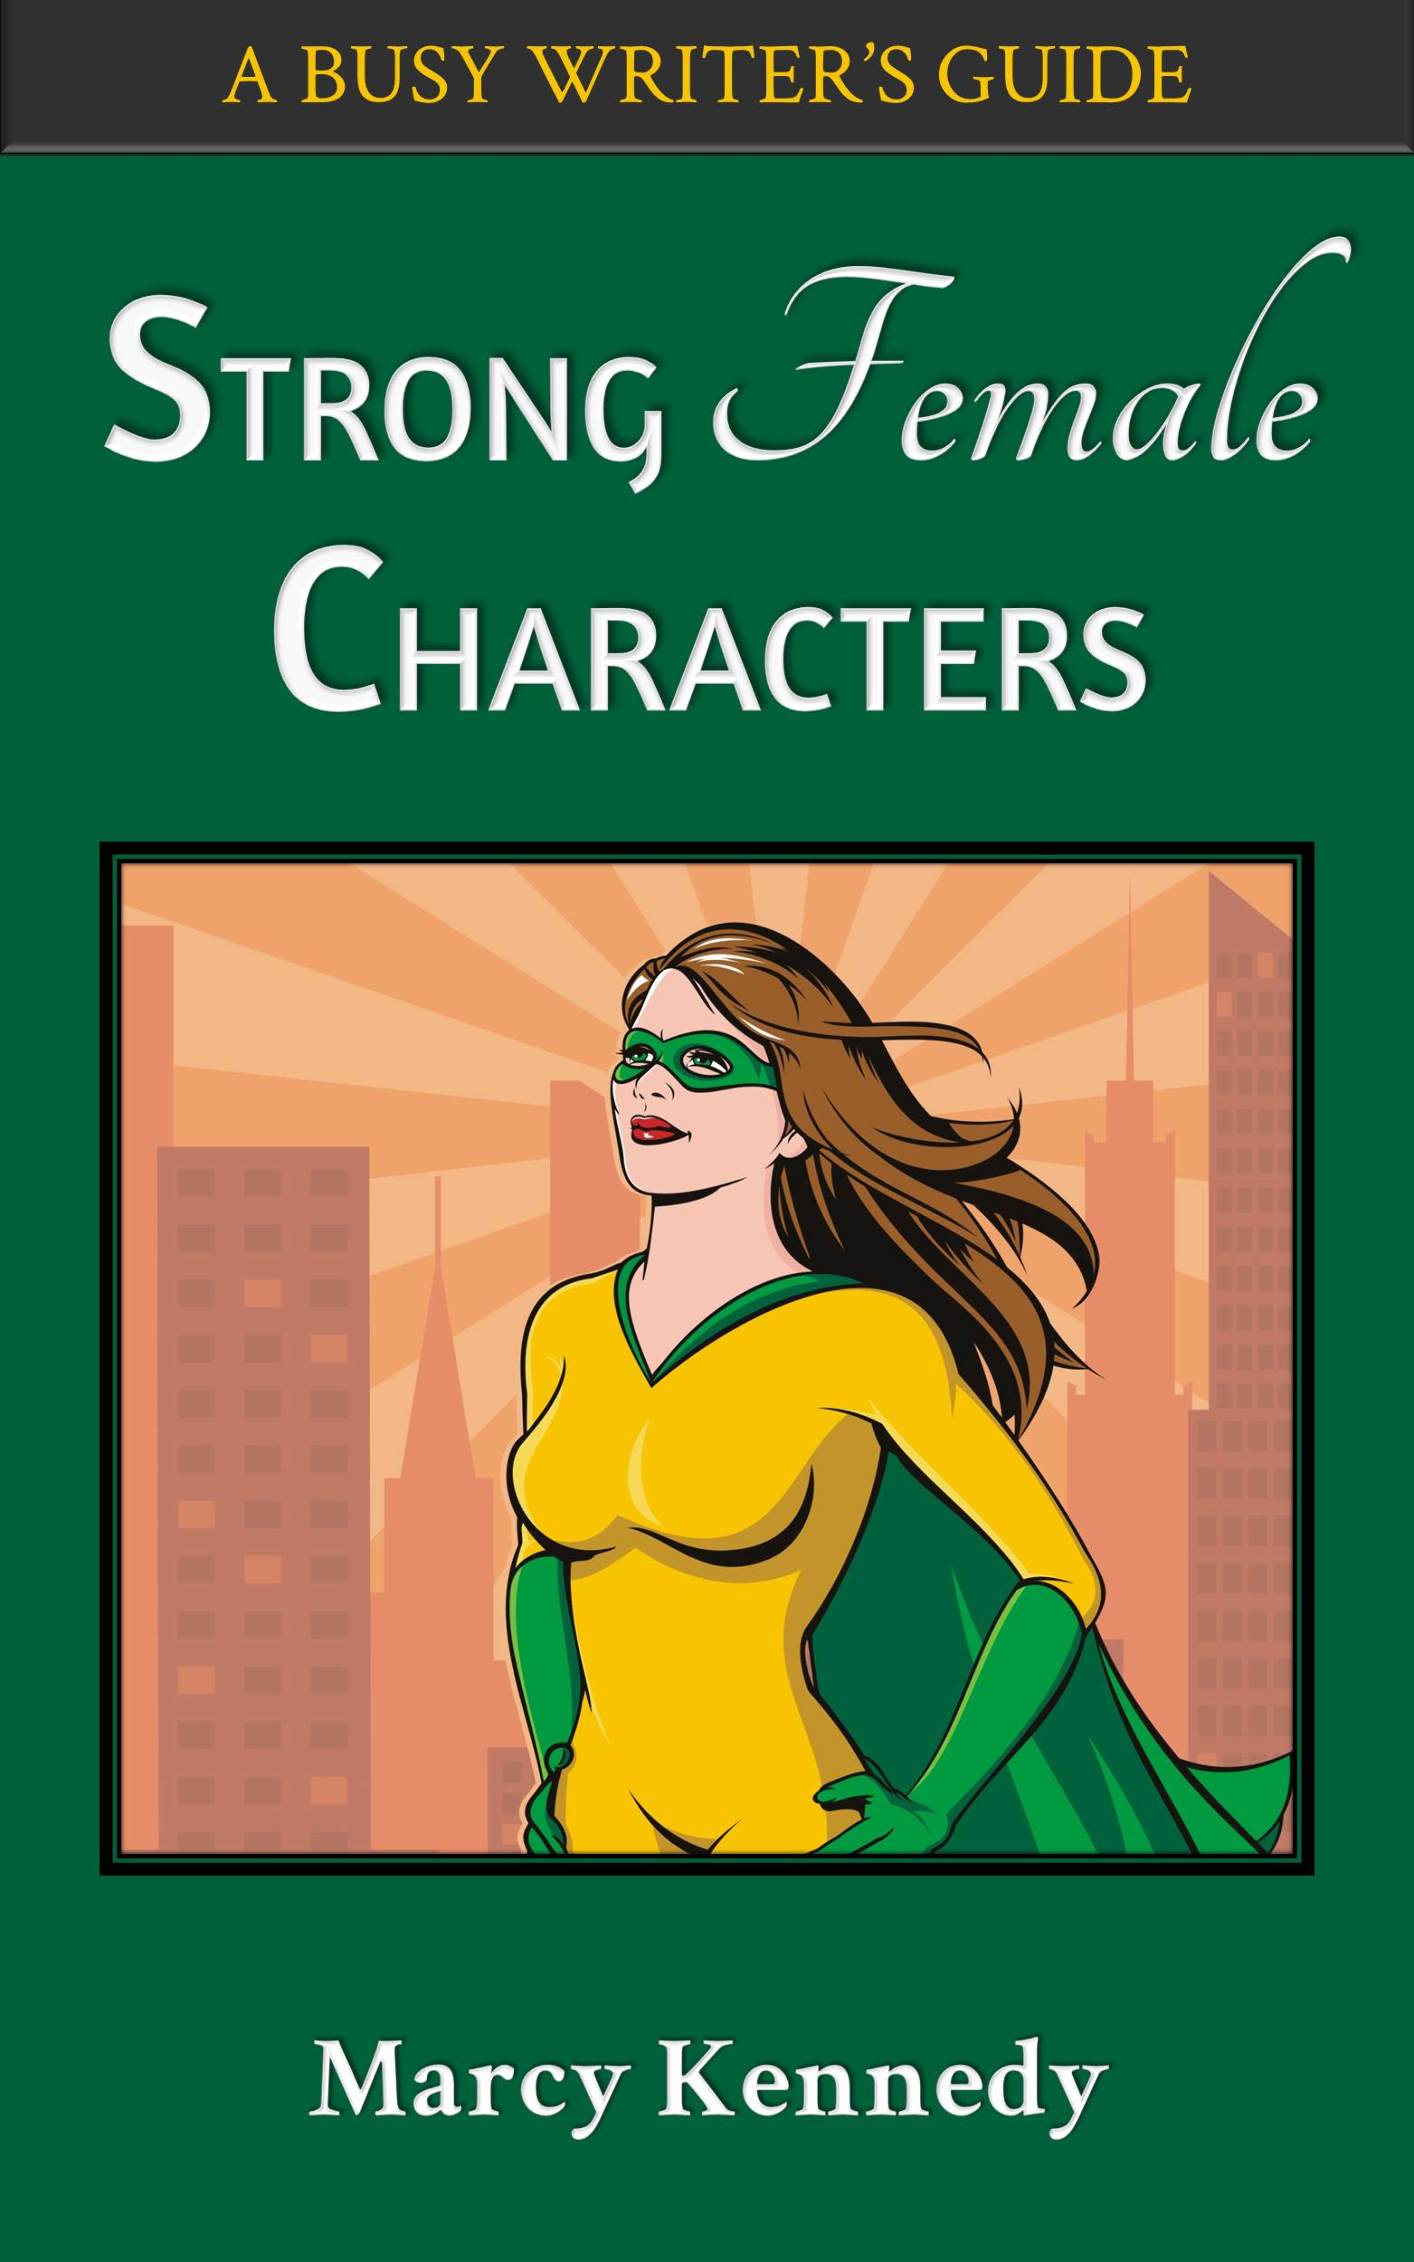 STRONG FEMALE CHARACTERS A Busy Writers Guide Marcy Kennedy Copyright 2013 - photo 1